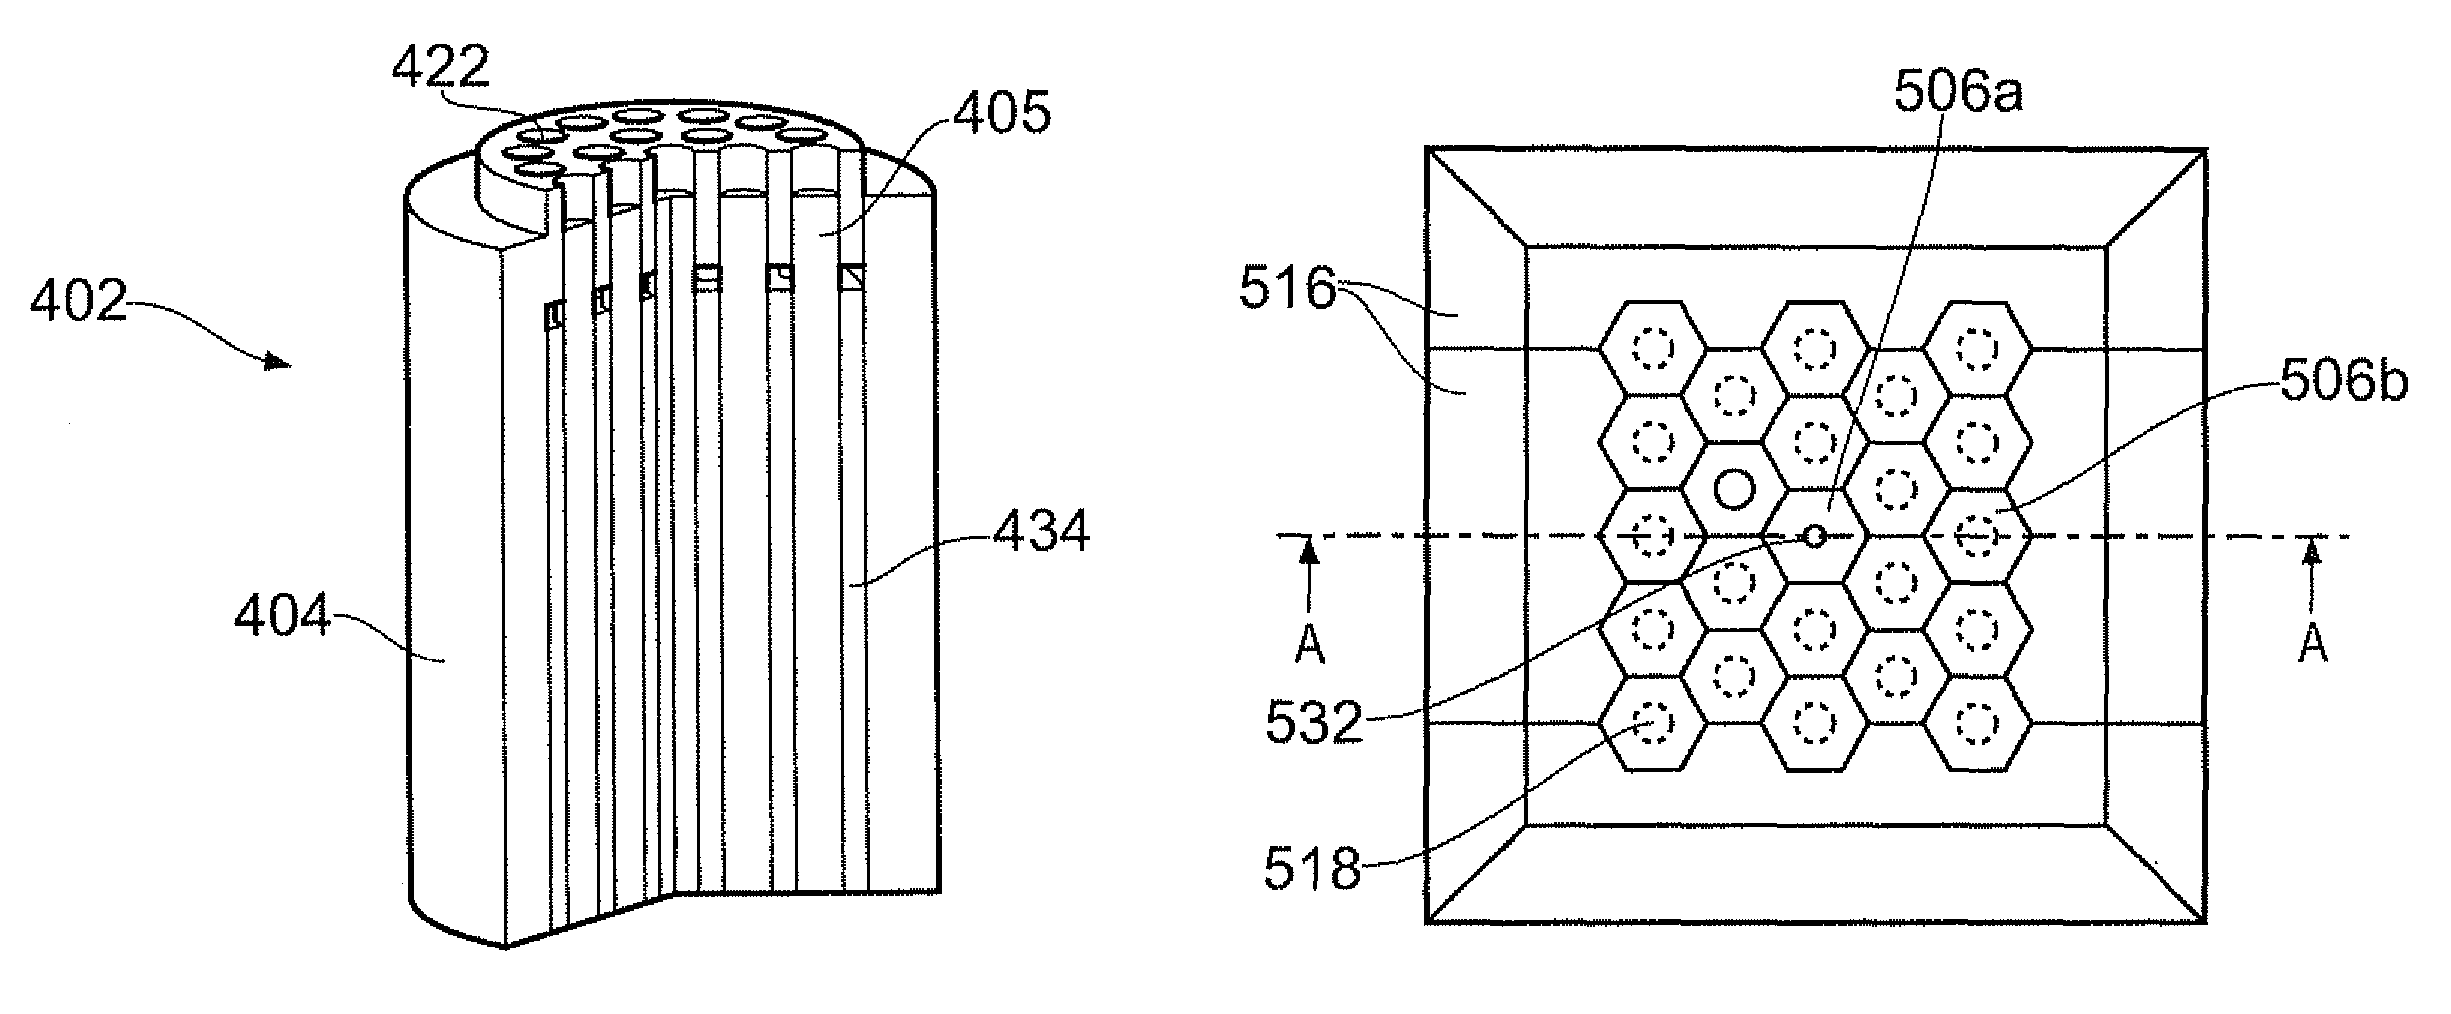 Adhesive fastening elements for holding a workpiece and methods of de-bonding a workpiece from an adhesive fastening element